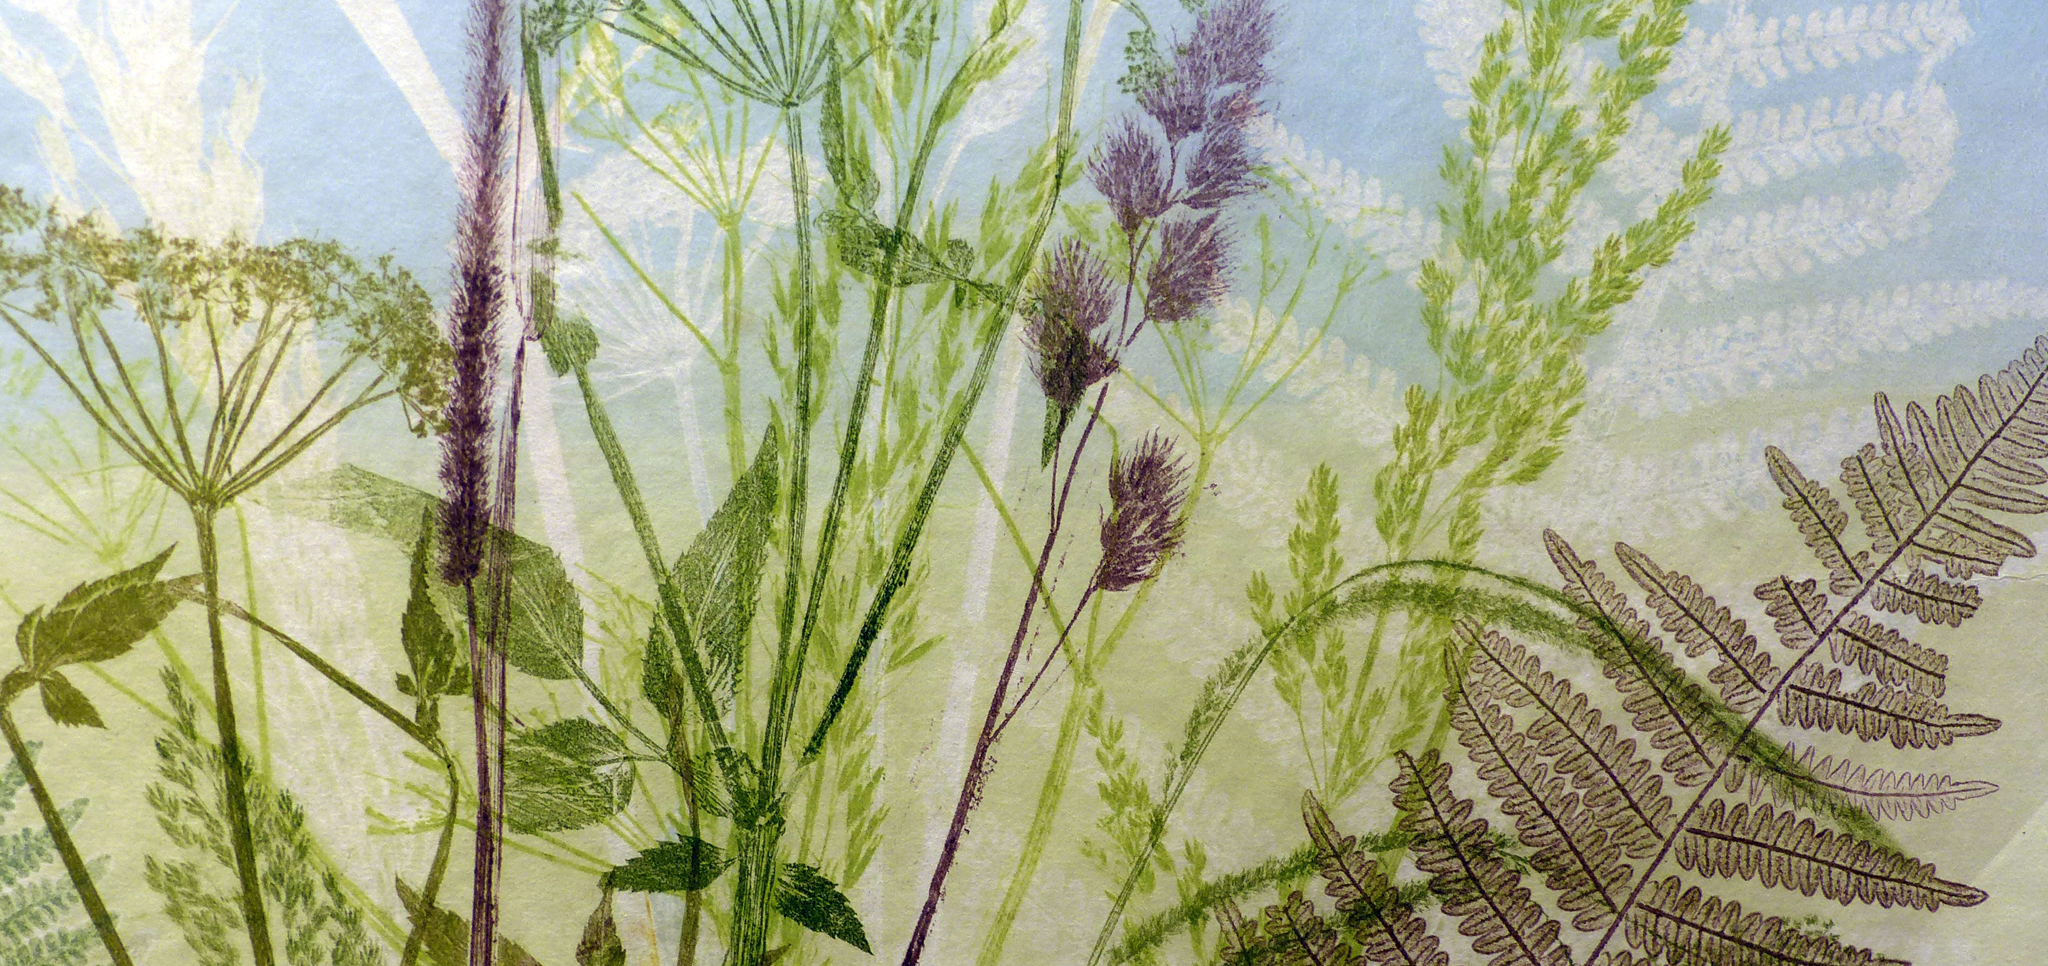 Multicoloured monoprint banner of British wild plants including fern and grasses.